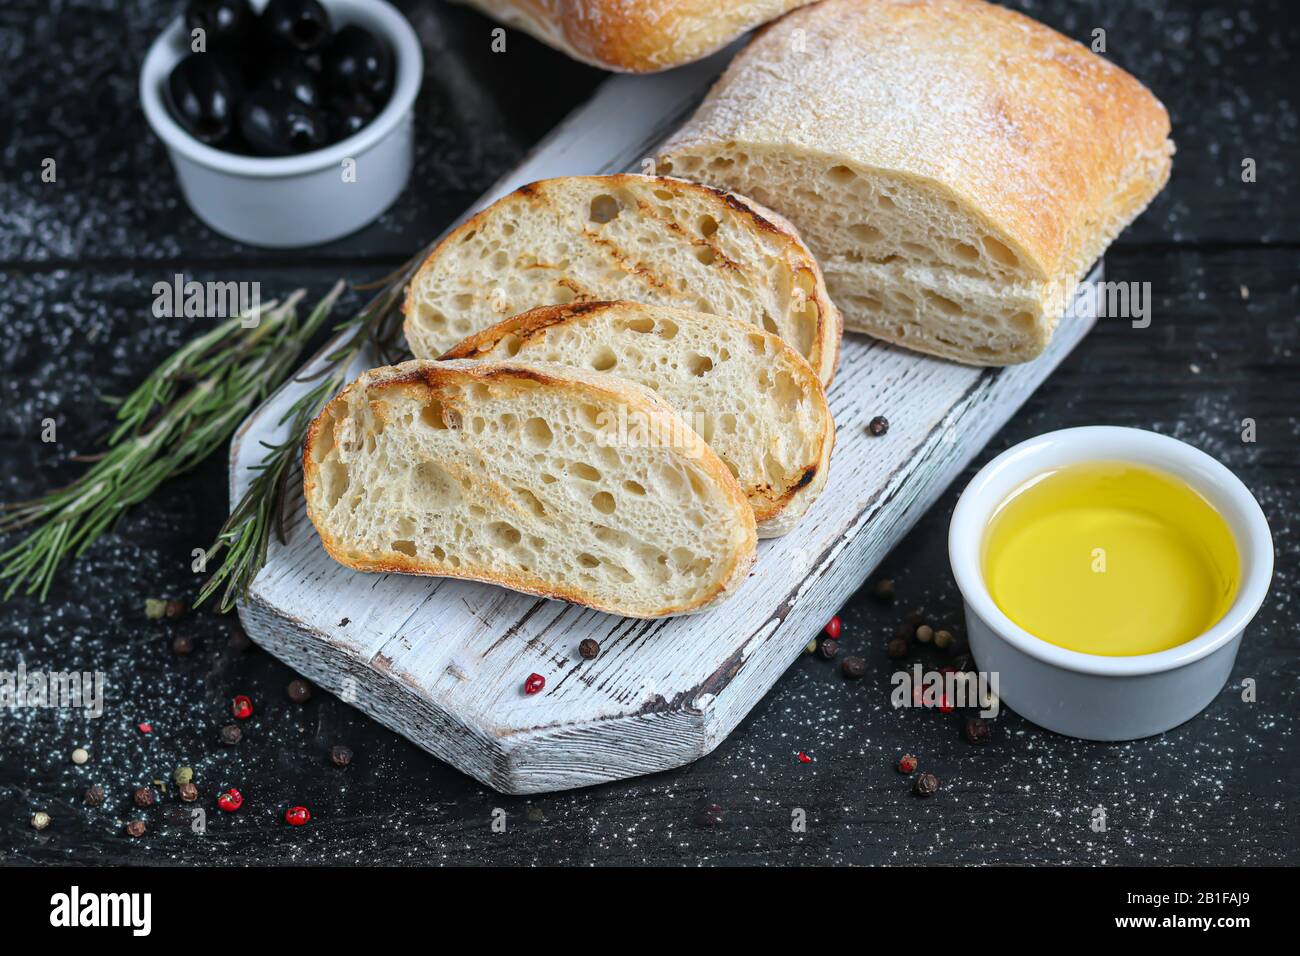 Ciabatta with rosemary, olive oil and cherry tomatoes on a wooden board. On a dark background. Copy space Stock Photo